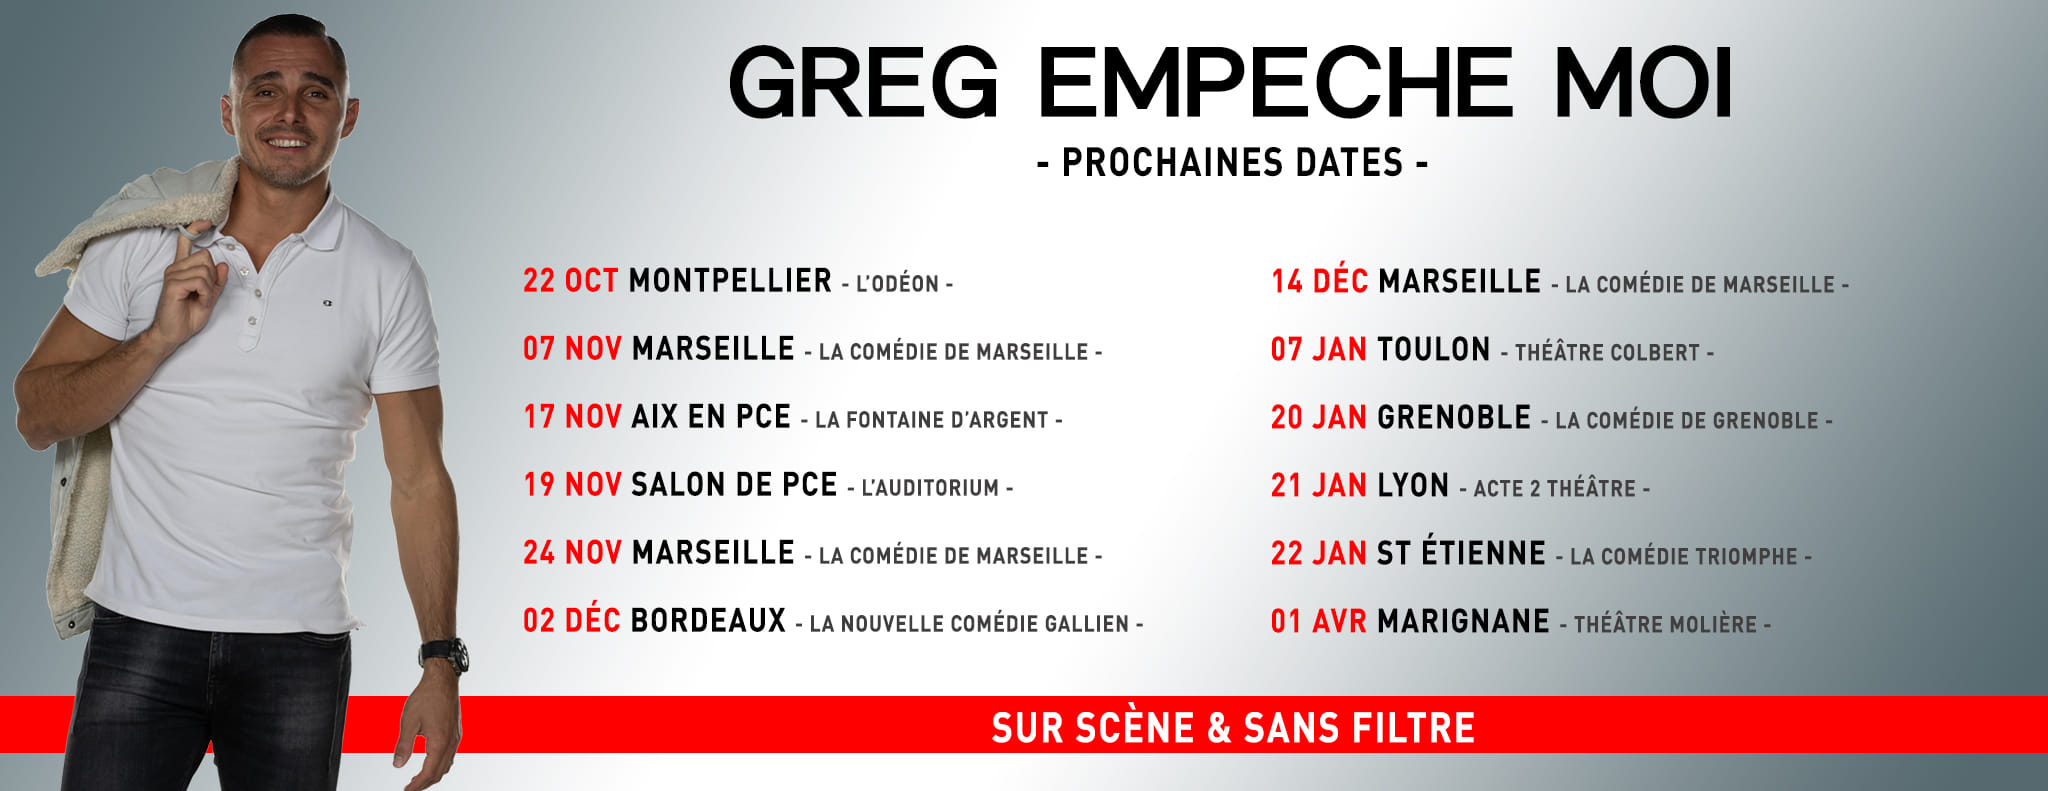 GREG EMPECHE MOI EN RODAGE ONE  MAN SHOW STAND-UP - 1H20